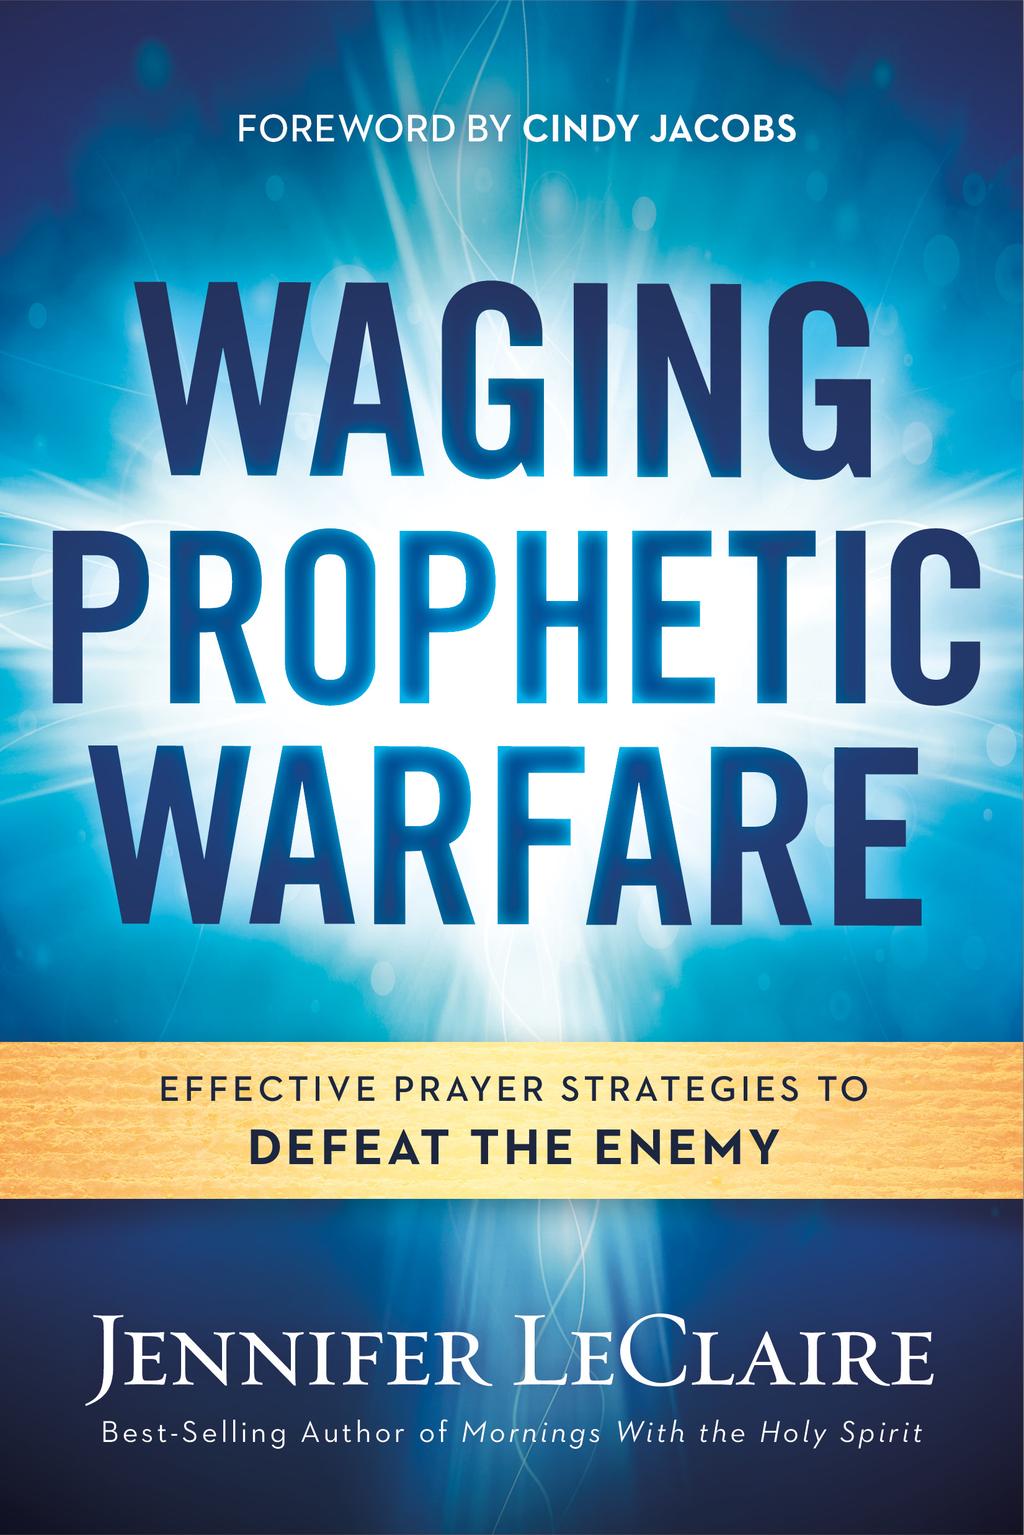 Put on Your Prophetic Armor 13 warfare technologies at your disposal.